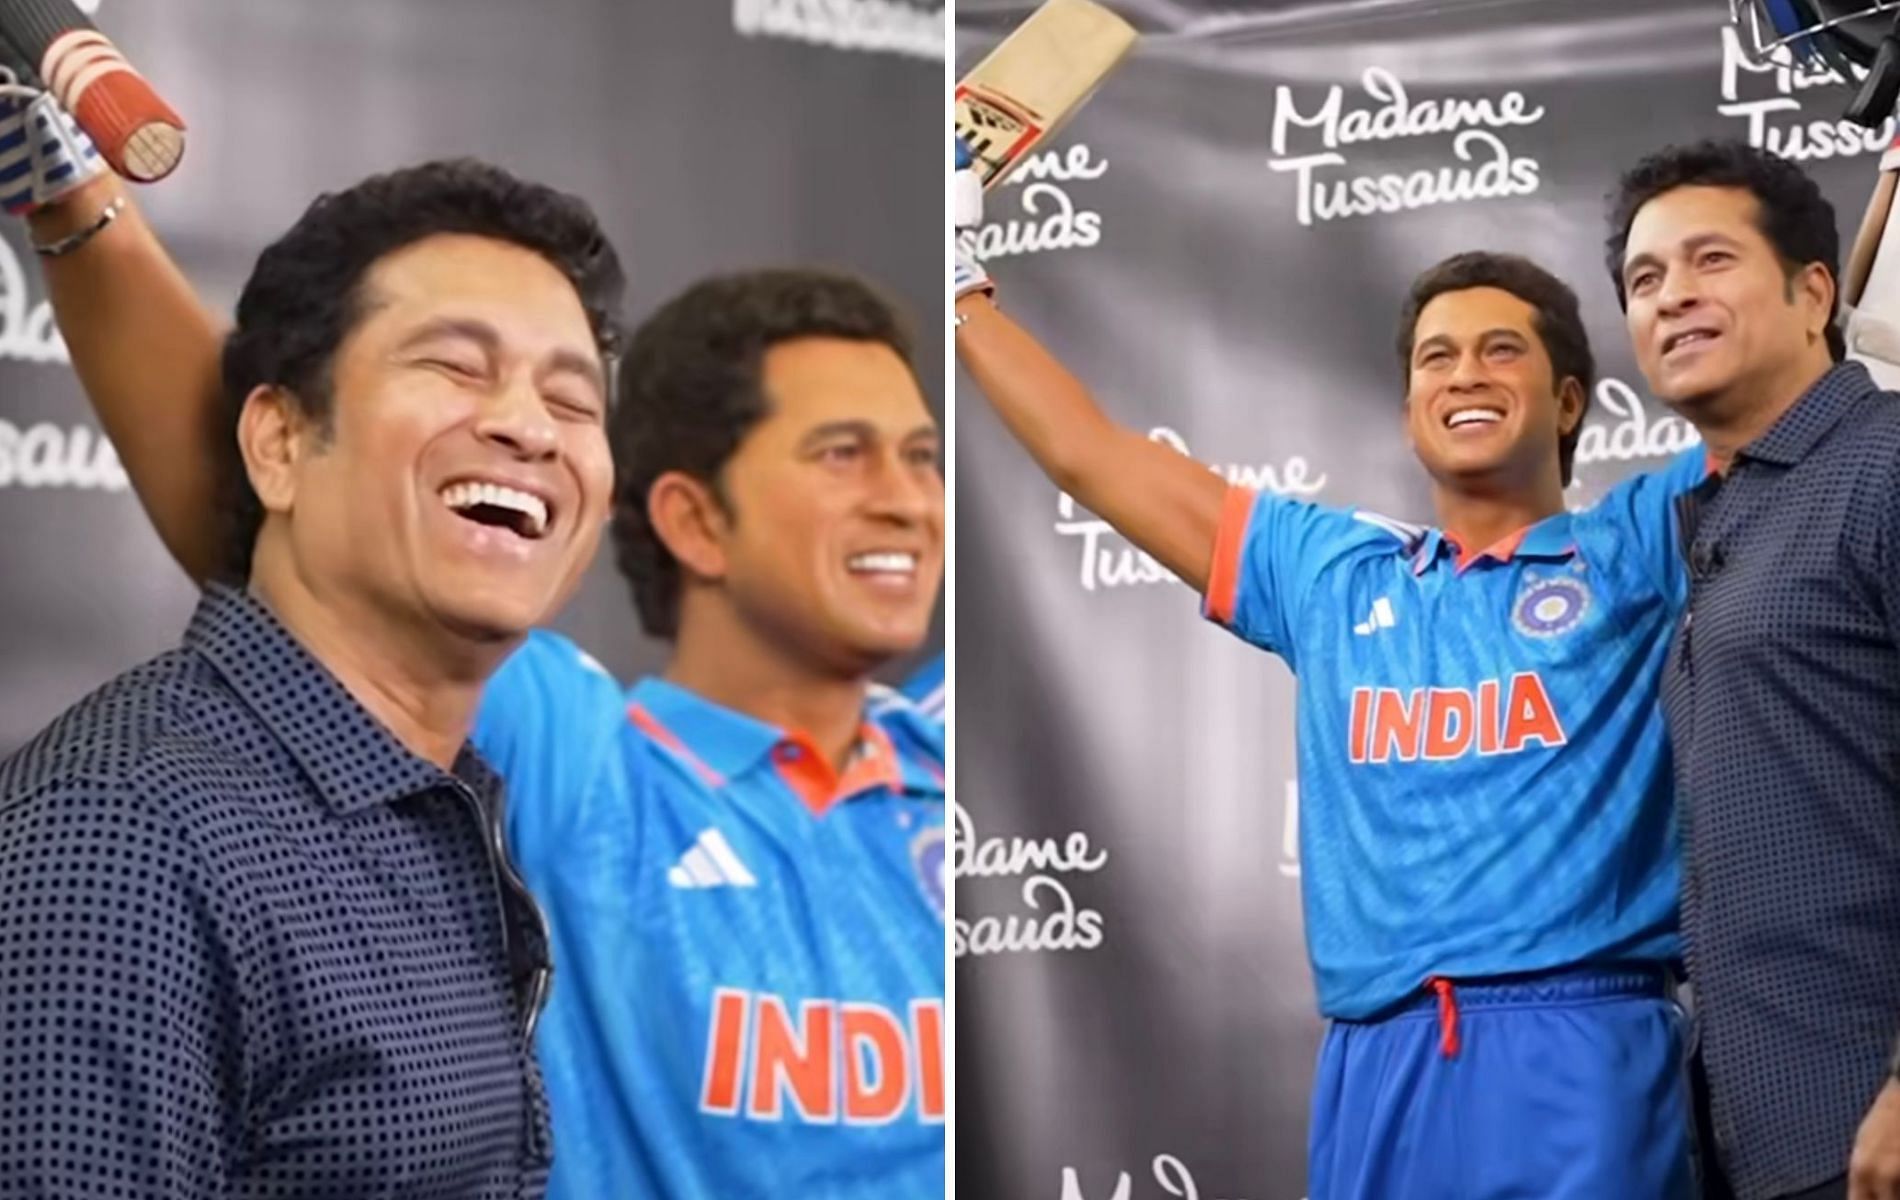 [Watch] Sachin Tendulkar poses with his wax statue at Madame Tussauds in New York